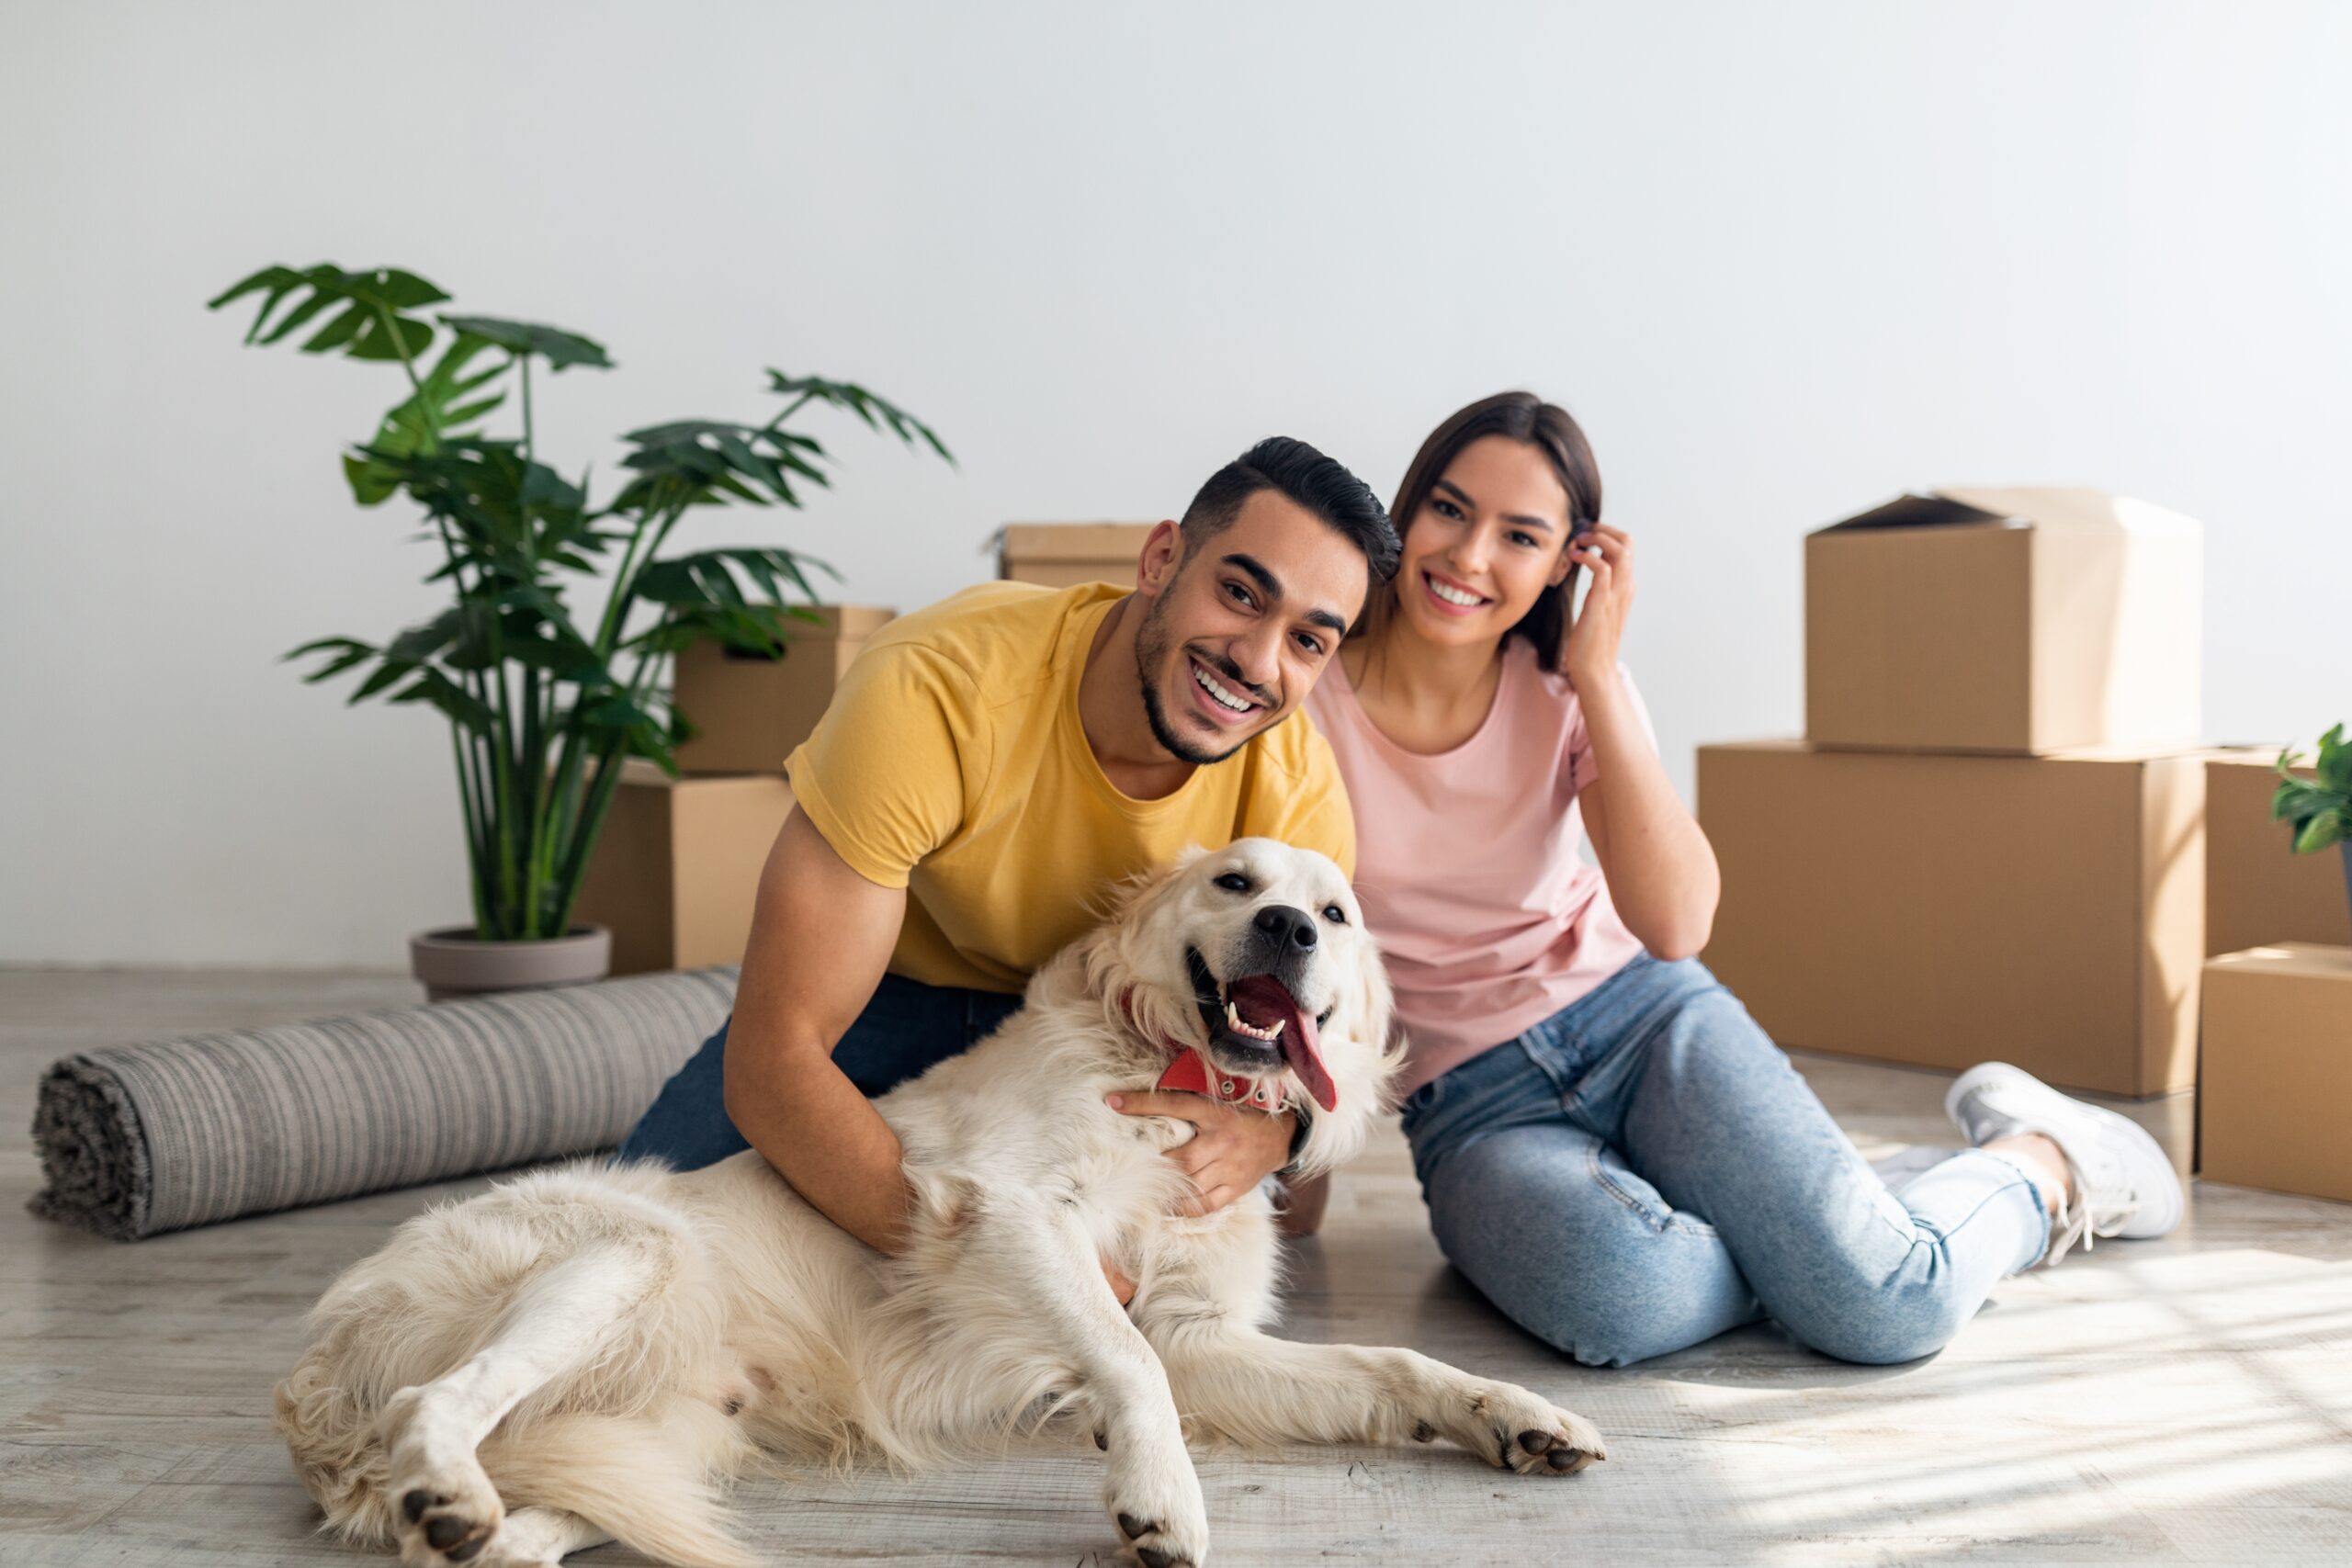 Tips for Younger Homebuyers: How To Make Your Dream a Reality